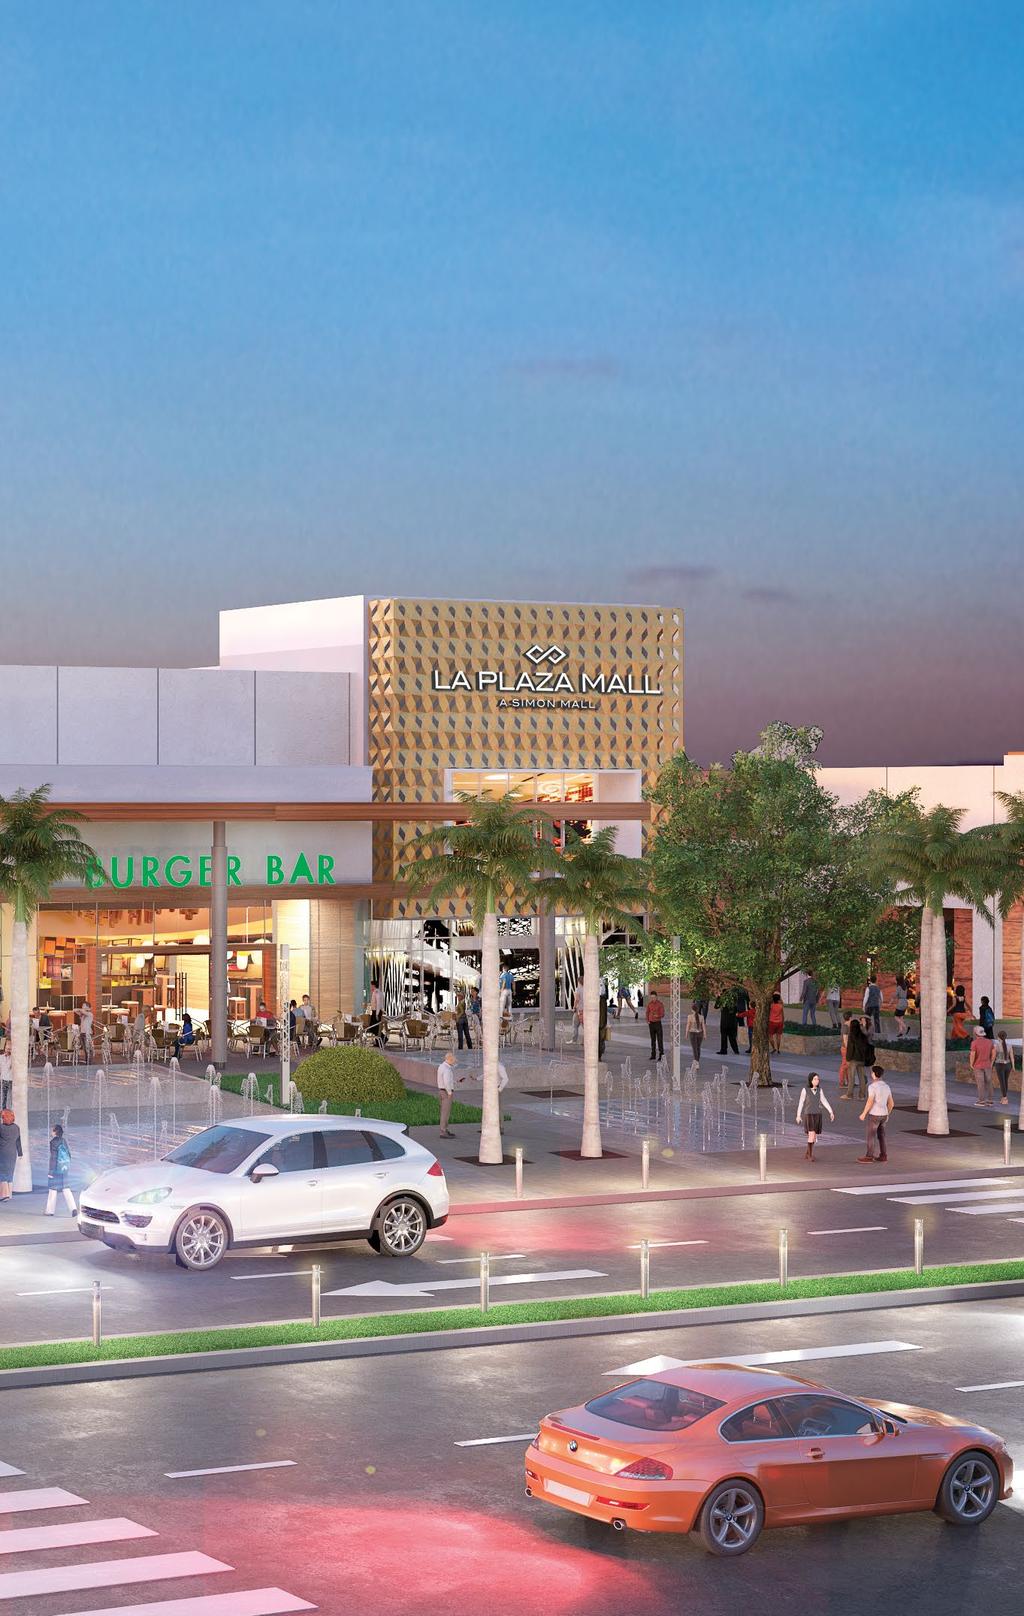 EVOLVING OUR STYLE La Plaza Mall is known throughout the region as the destination for luxury shopping in South Texas.